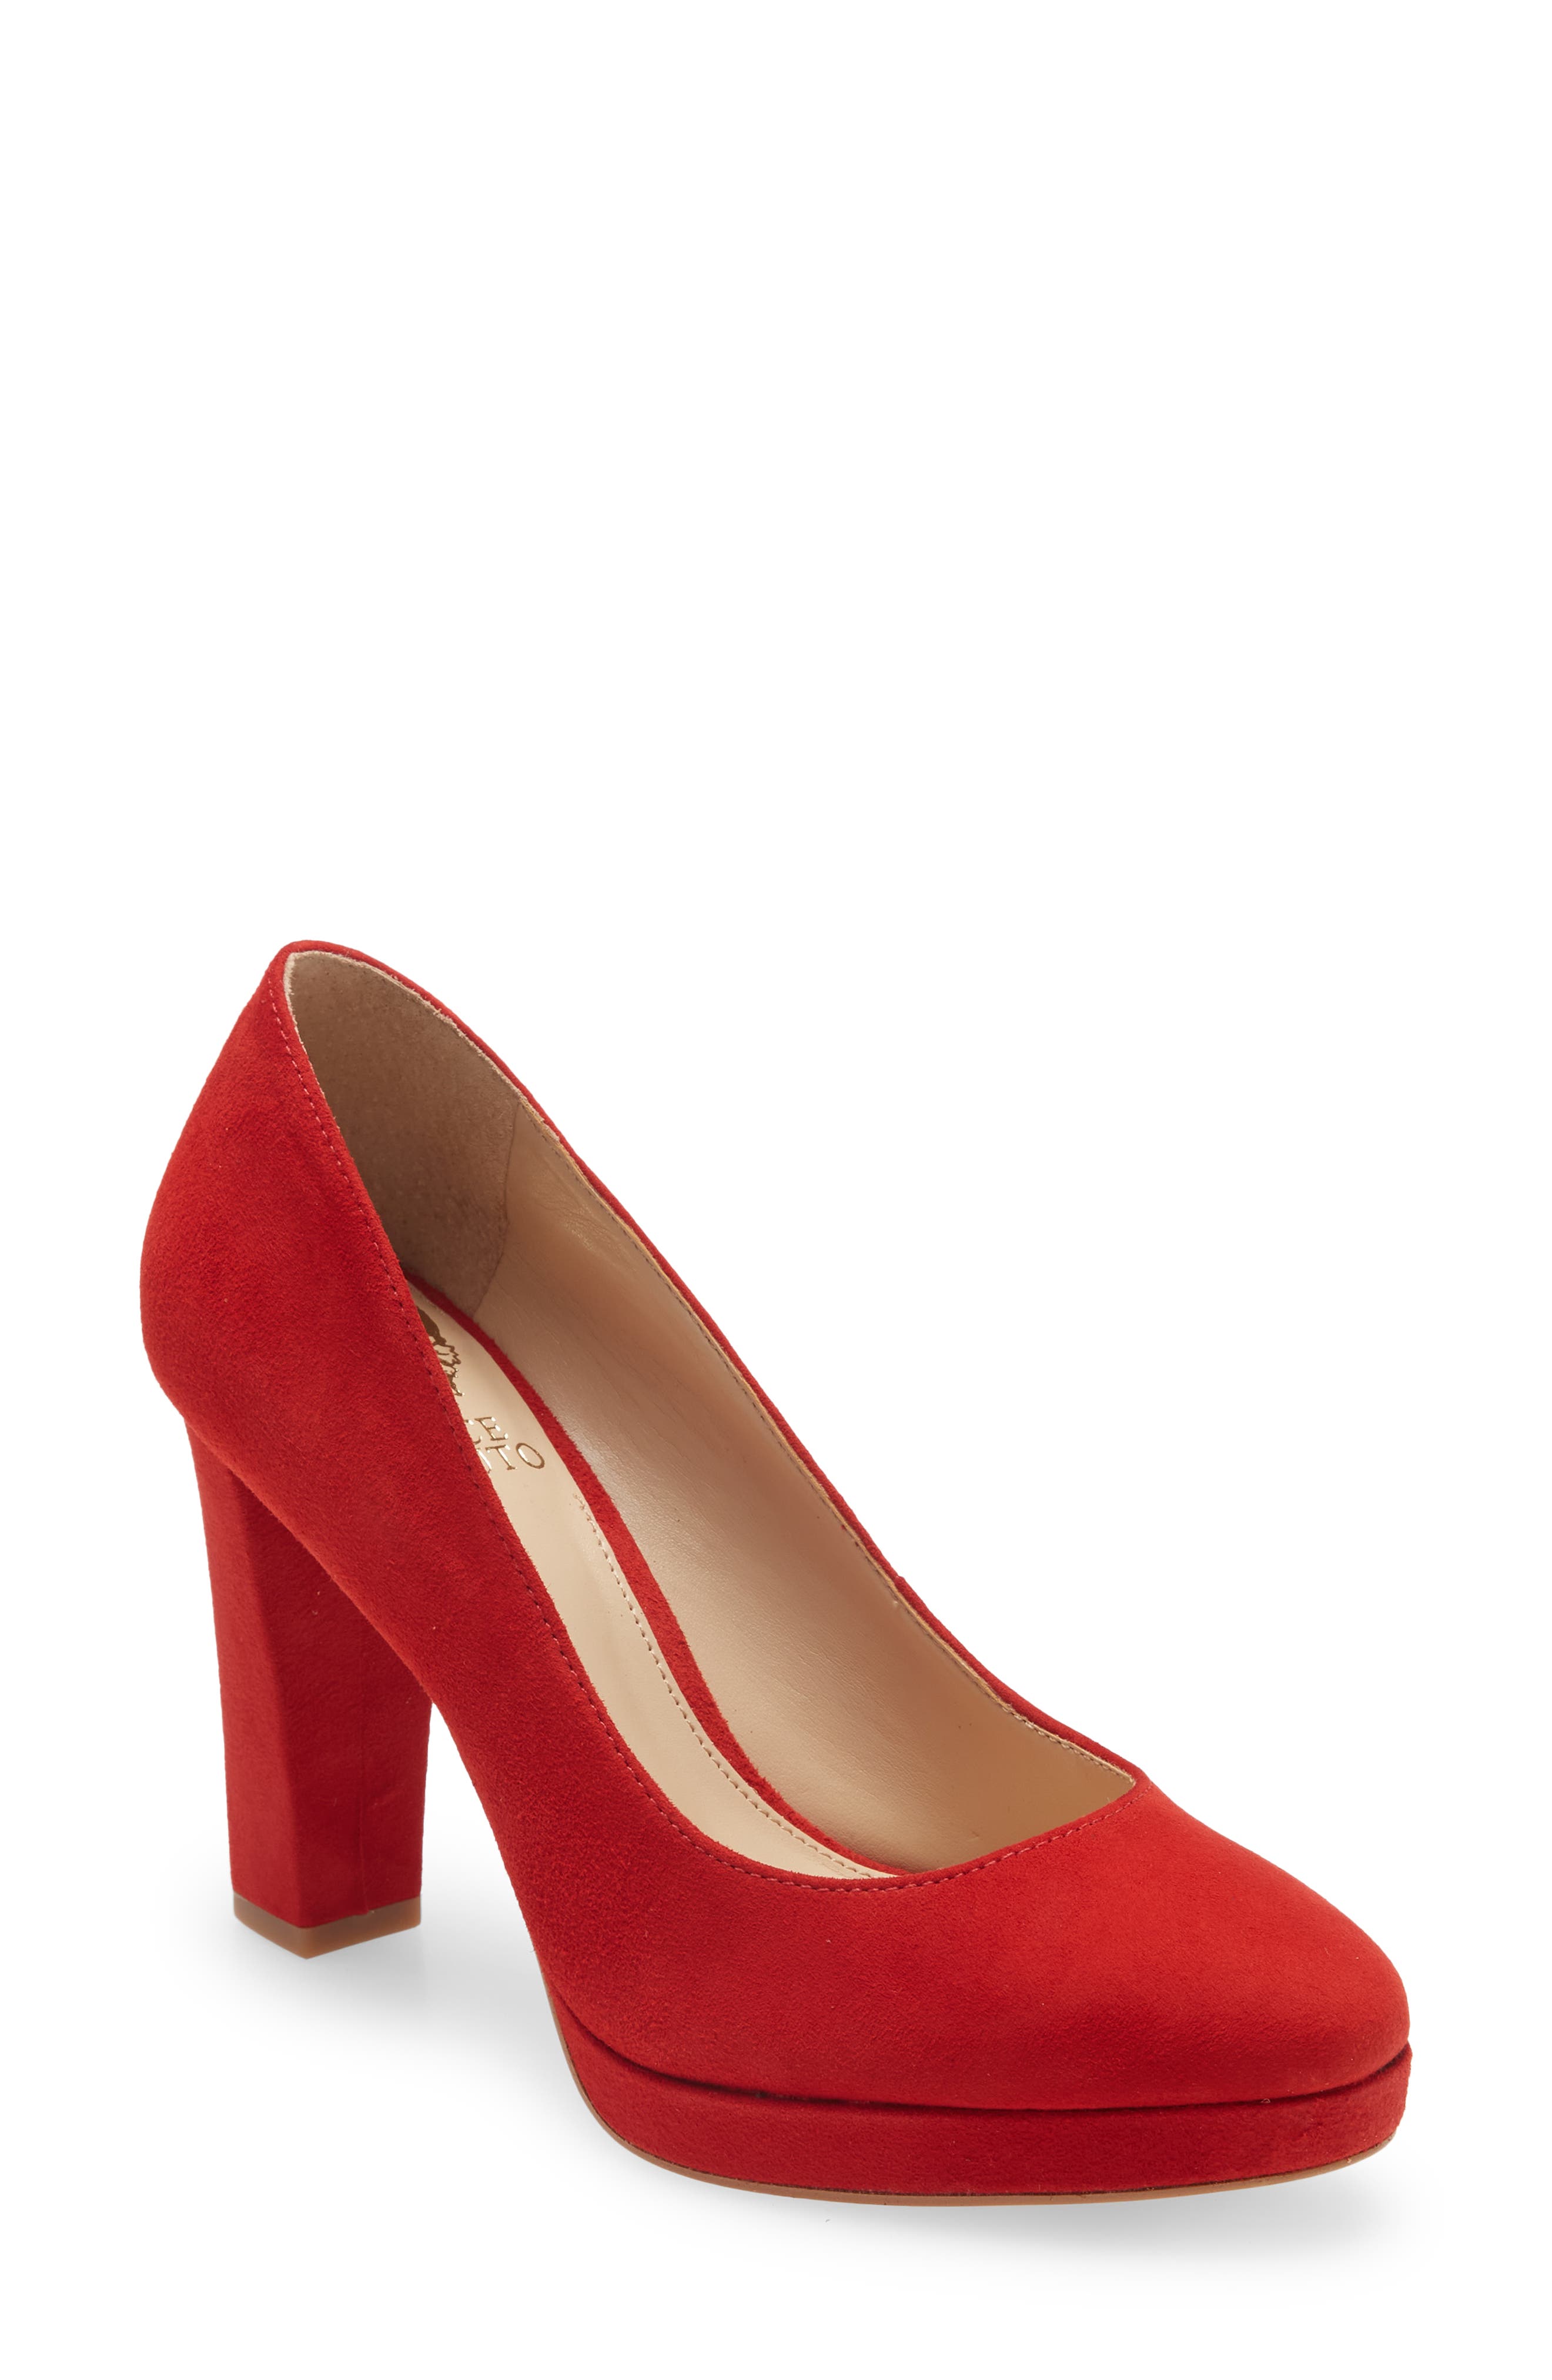 UPC 191707345744 product image for Vince Camuto Halria Pump in Cherry Berry True Suede at Nordstrom, Size 5 | upcitemdb.com